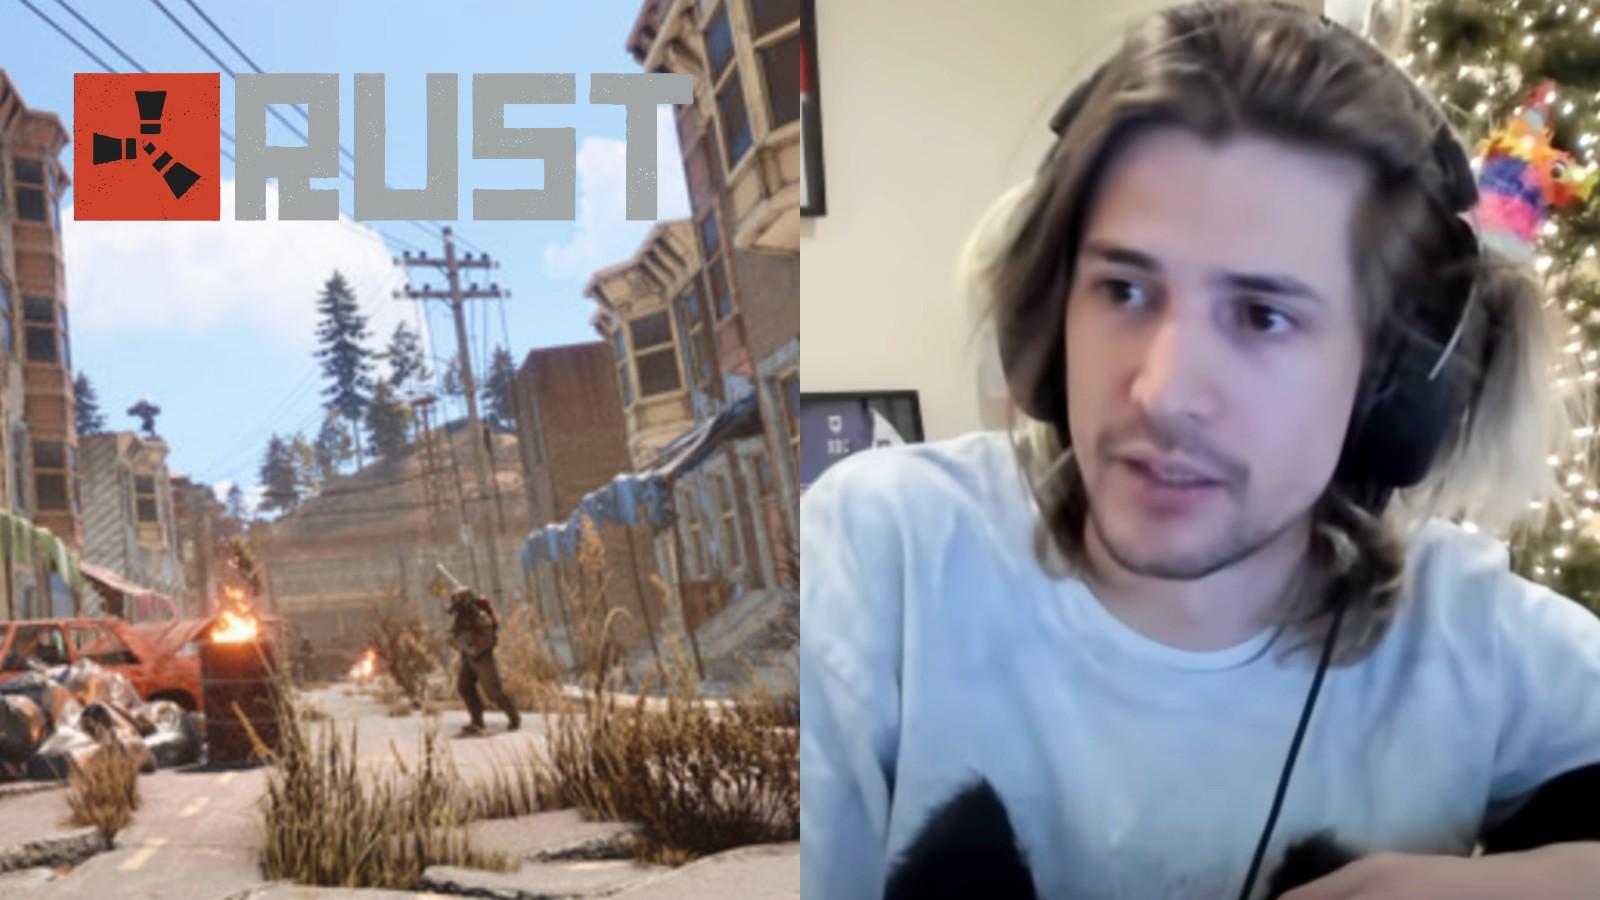 xQc next to a Rust promotional image and the Rust logo